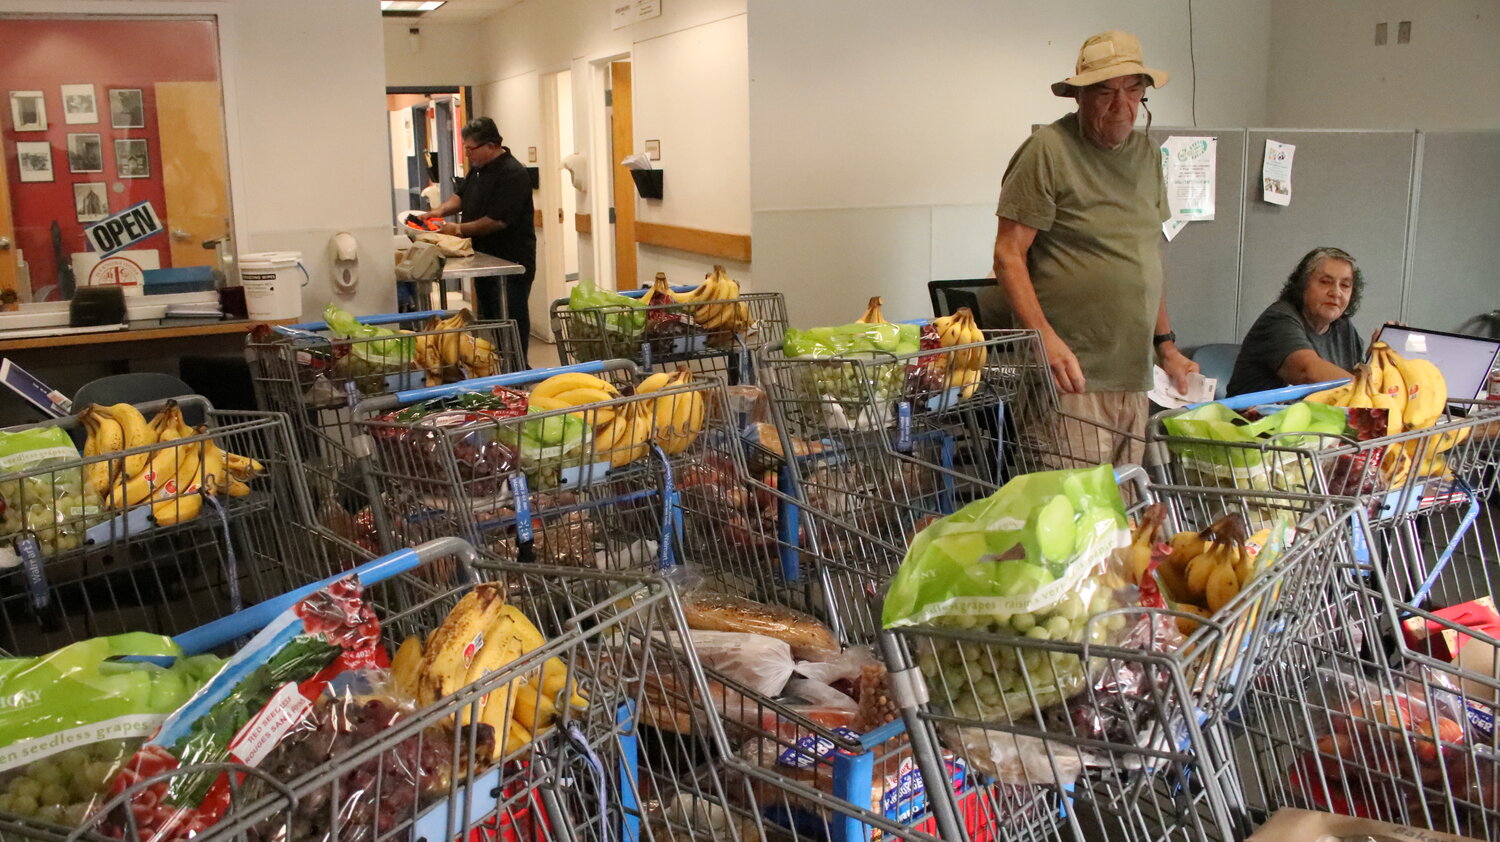 Volunteers work to distribute baskets of food to clients at Casa de Peregrinos emergency food pantry in Las Cruces, New Mexico in late July 2023. Advocates say they’re seeing more demand across Southern New Mexico for food assistance because of several factors, including a decline in COVID-19 relief programs and higher grocery store prices.